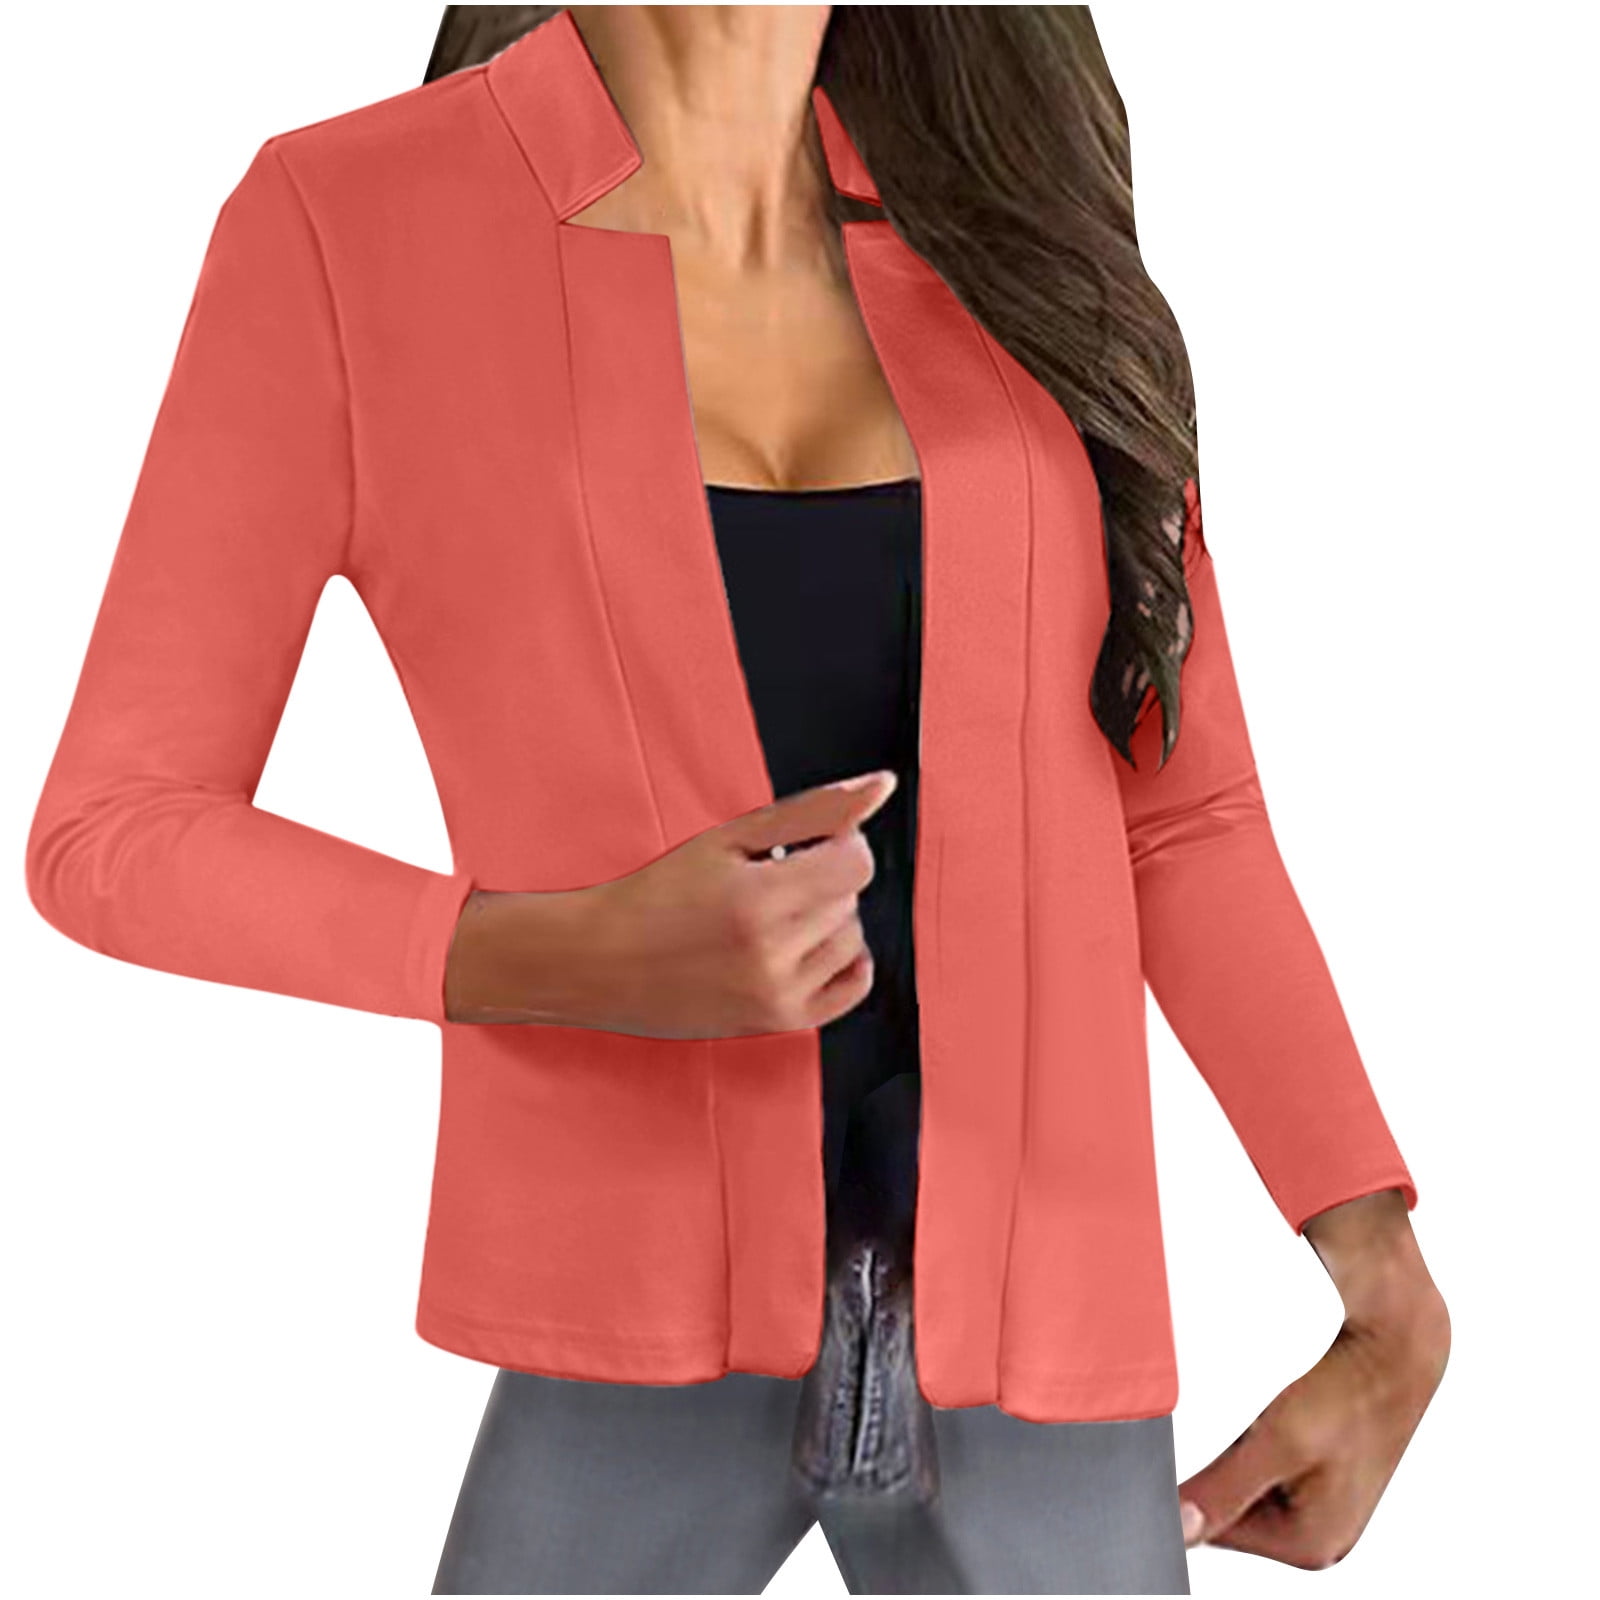 Deals of the Week ! BVnarty Discount Women's Jacket Coat Shacket Jacket  Casual Stand Collar Lightweight Leisure Office Suit Outerwear Winter  Fashion Top Plus Size Long Sleeve Solid Color Orange L 